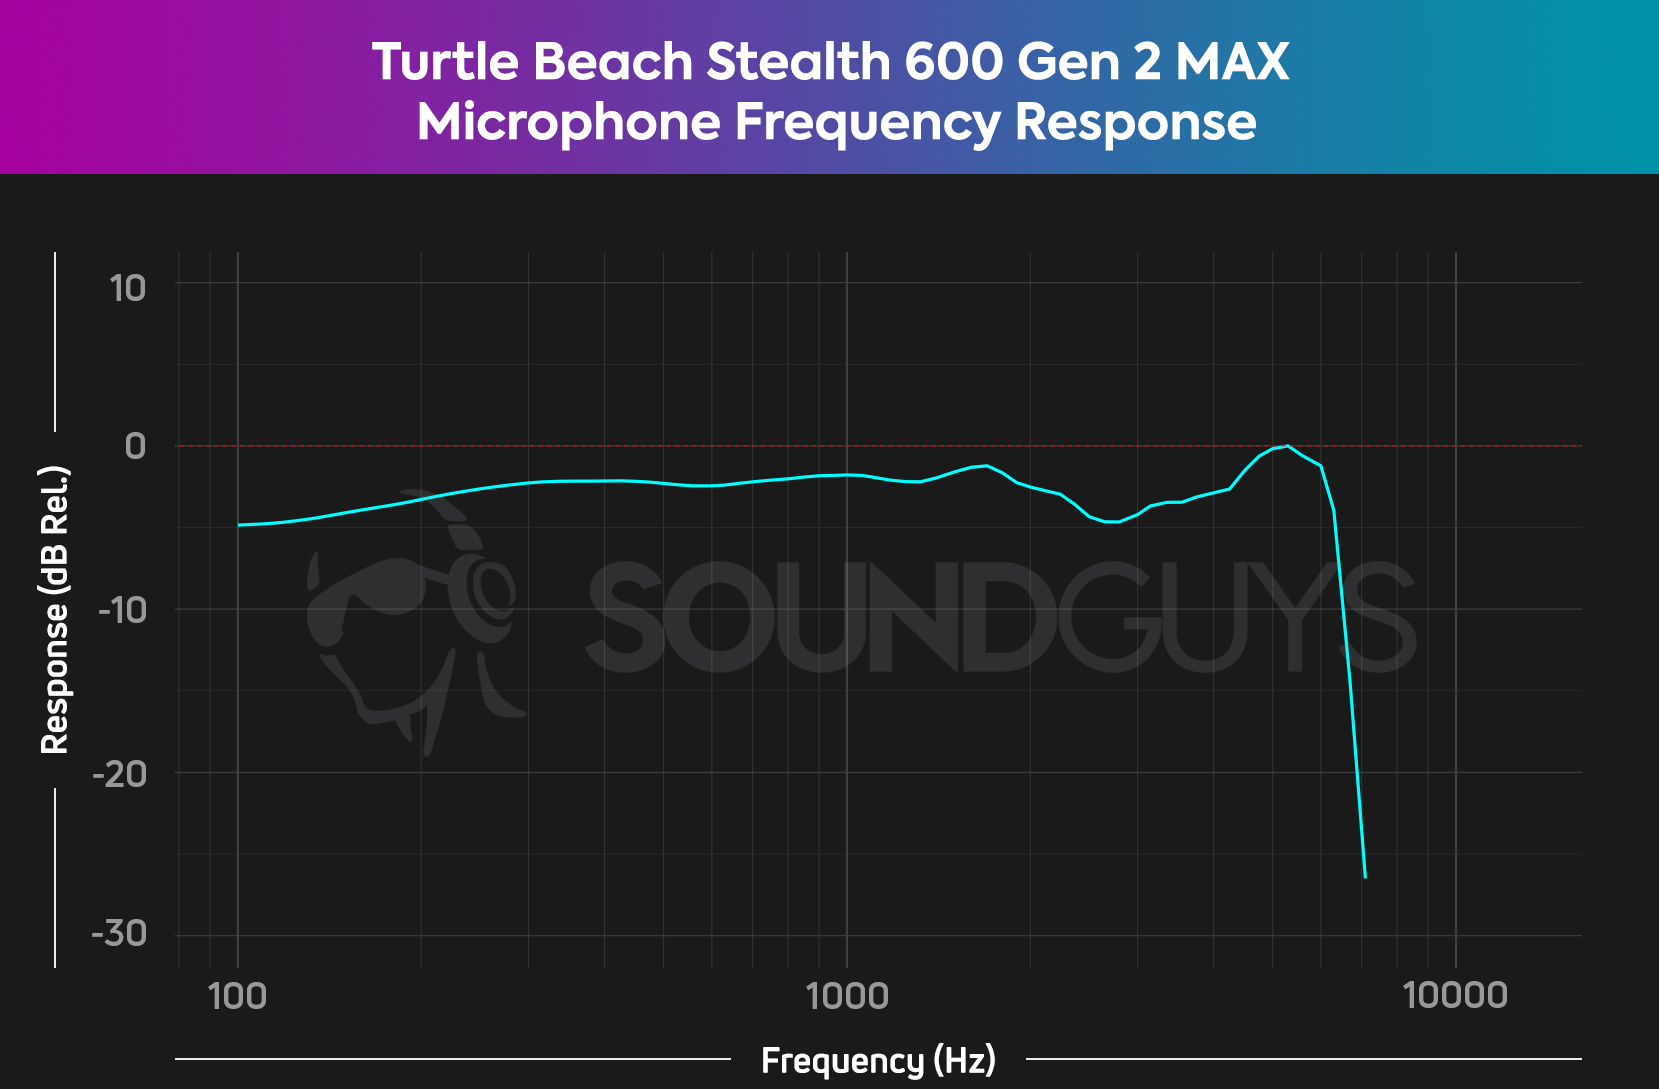 A microphone chart for the Turtle Beach Stealth 600 Gen 2 MAX microphone, which shows a fairly accurate frequency response across the vocal spectrum.